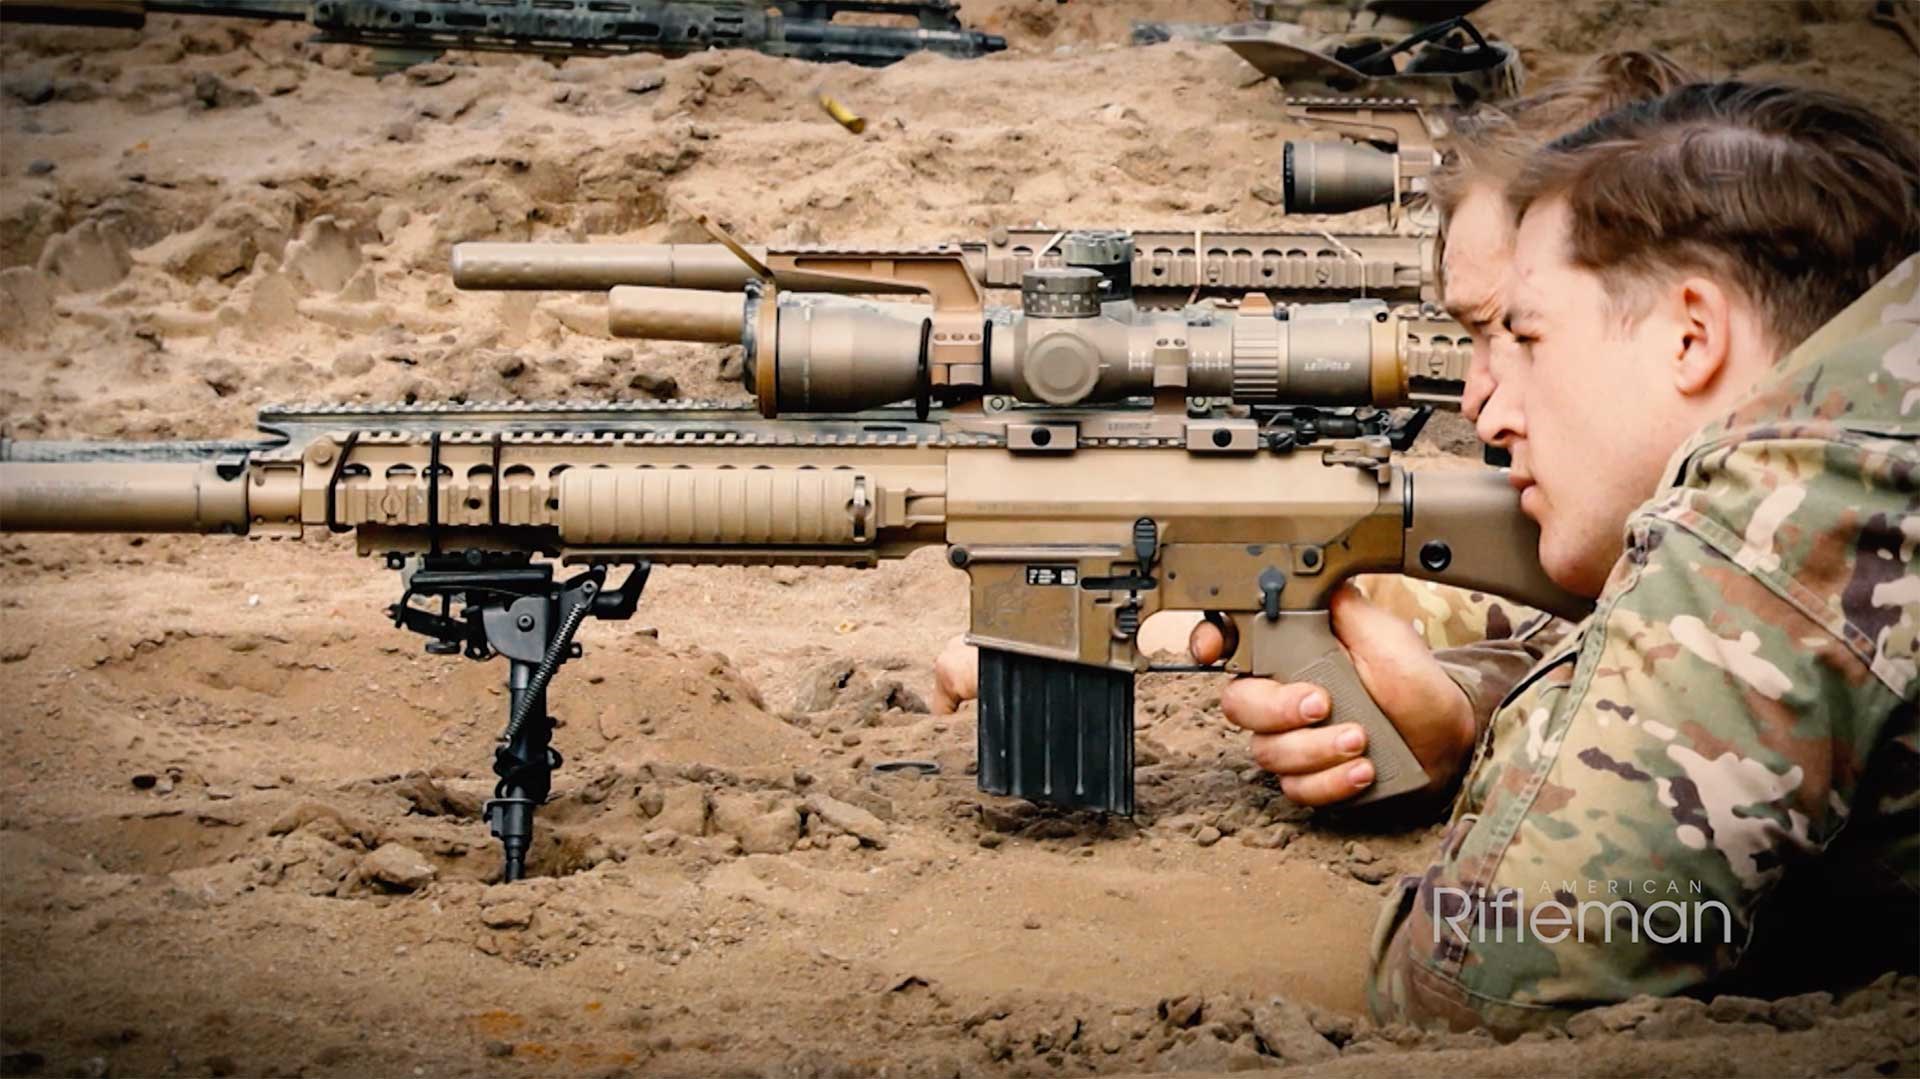 A U.S. Army soldier shooting the Army's M110 Semi-Automatic Sniper System equipped with a Leupold Mark 5HD optic.